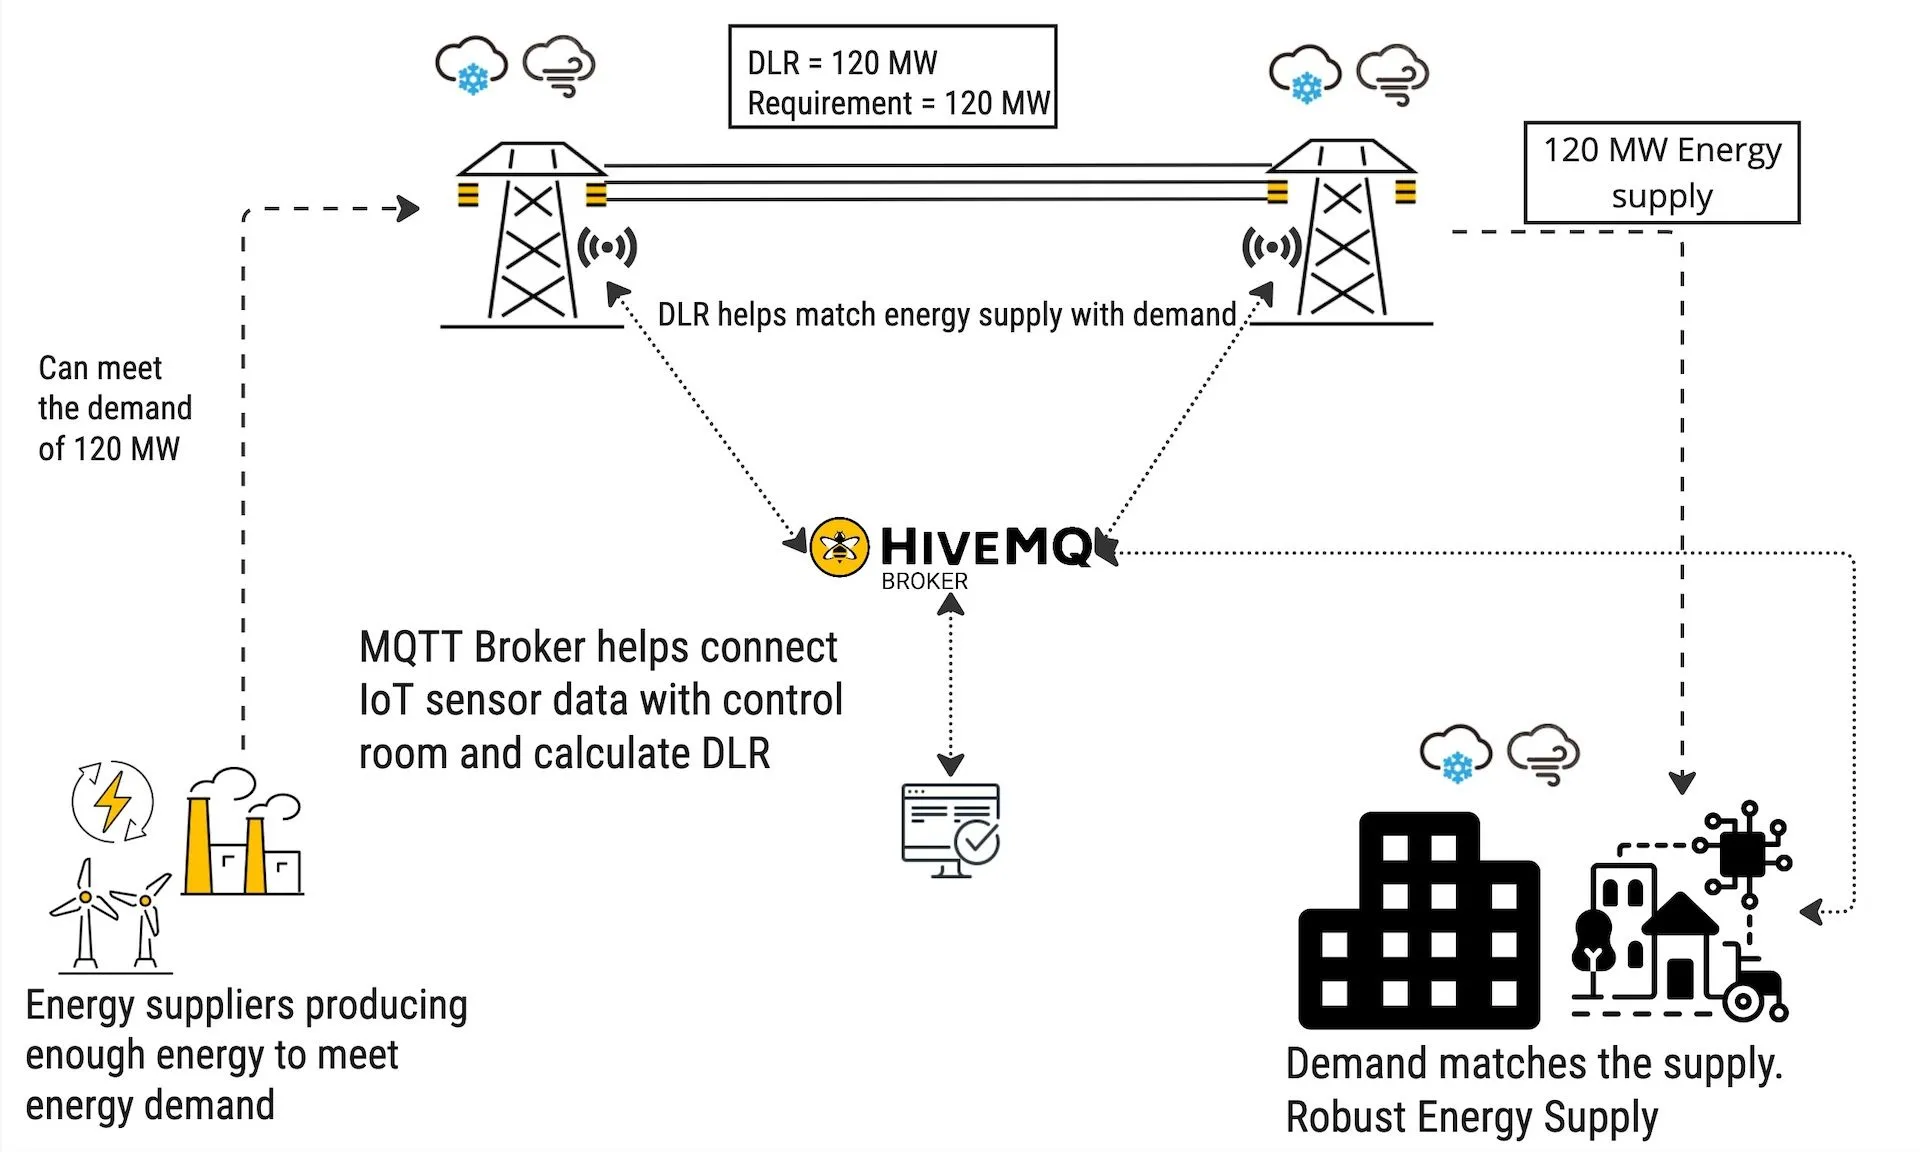 HiveMQ is the Right Platform for DLR and Other Grid-Enabling Technologies